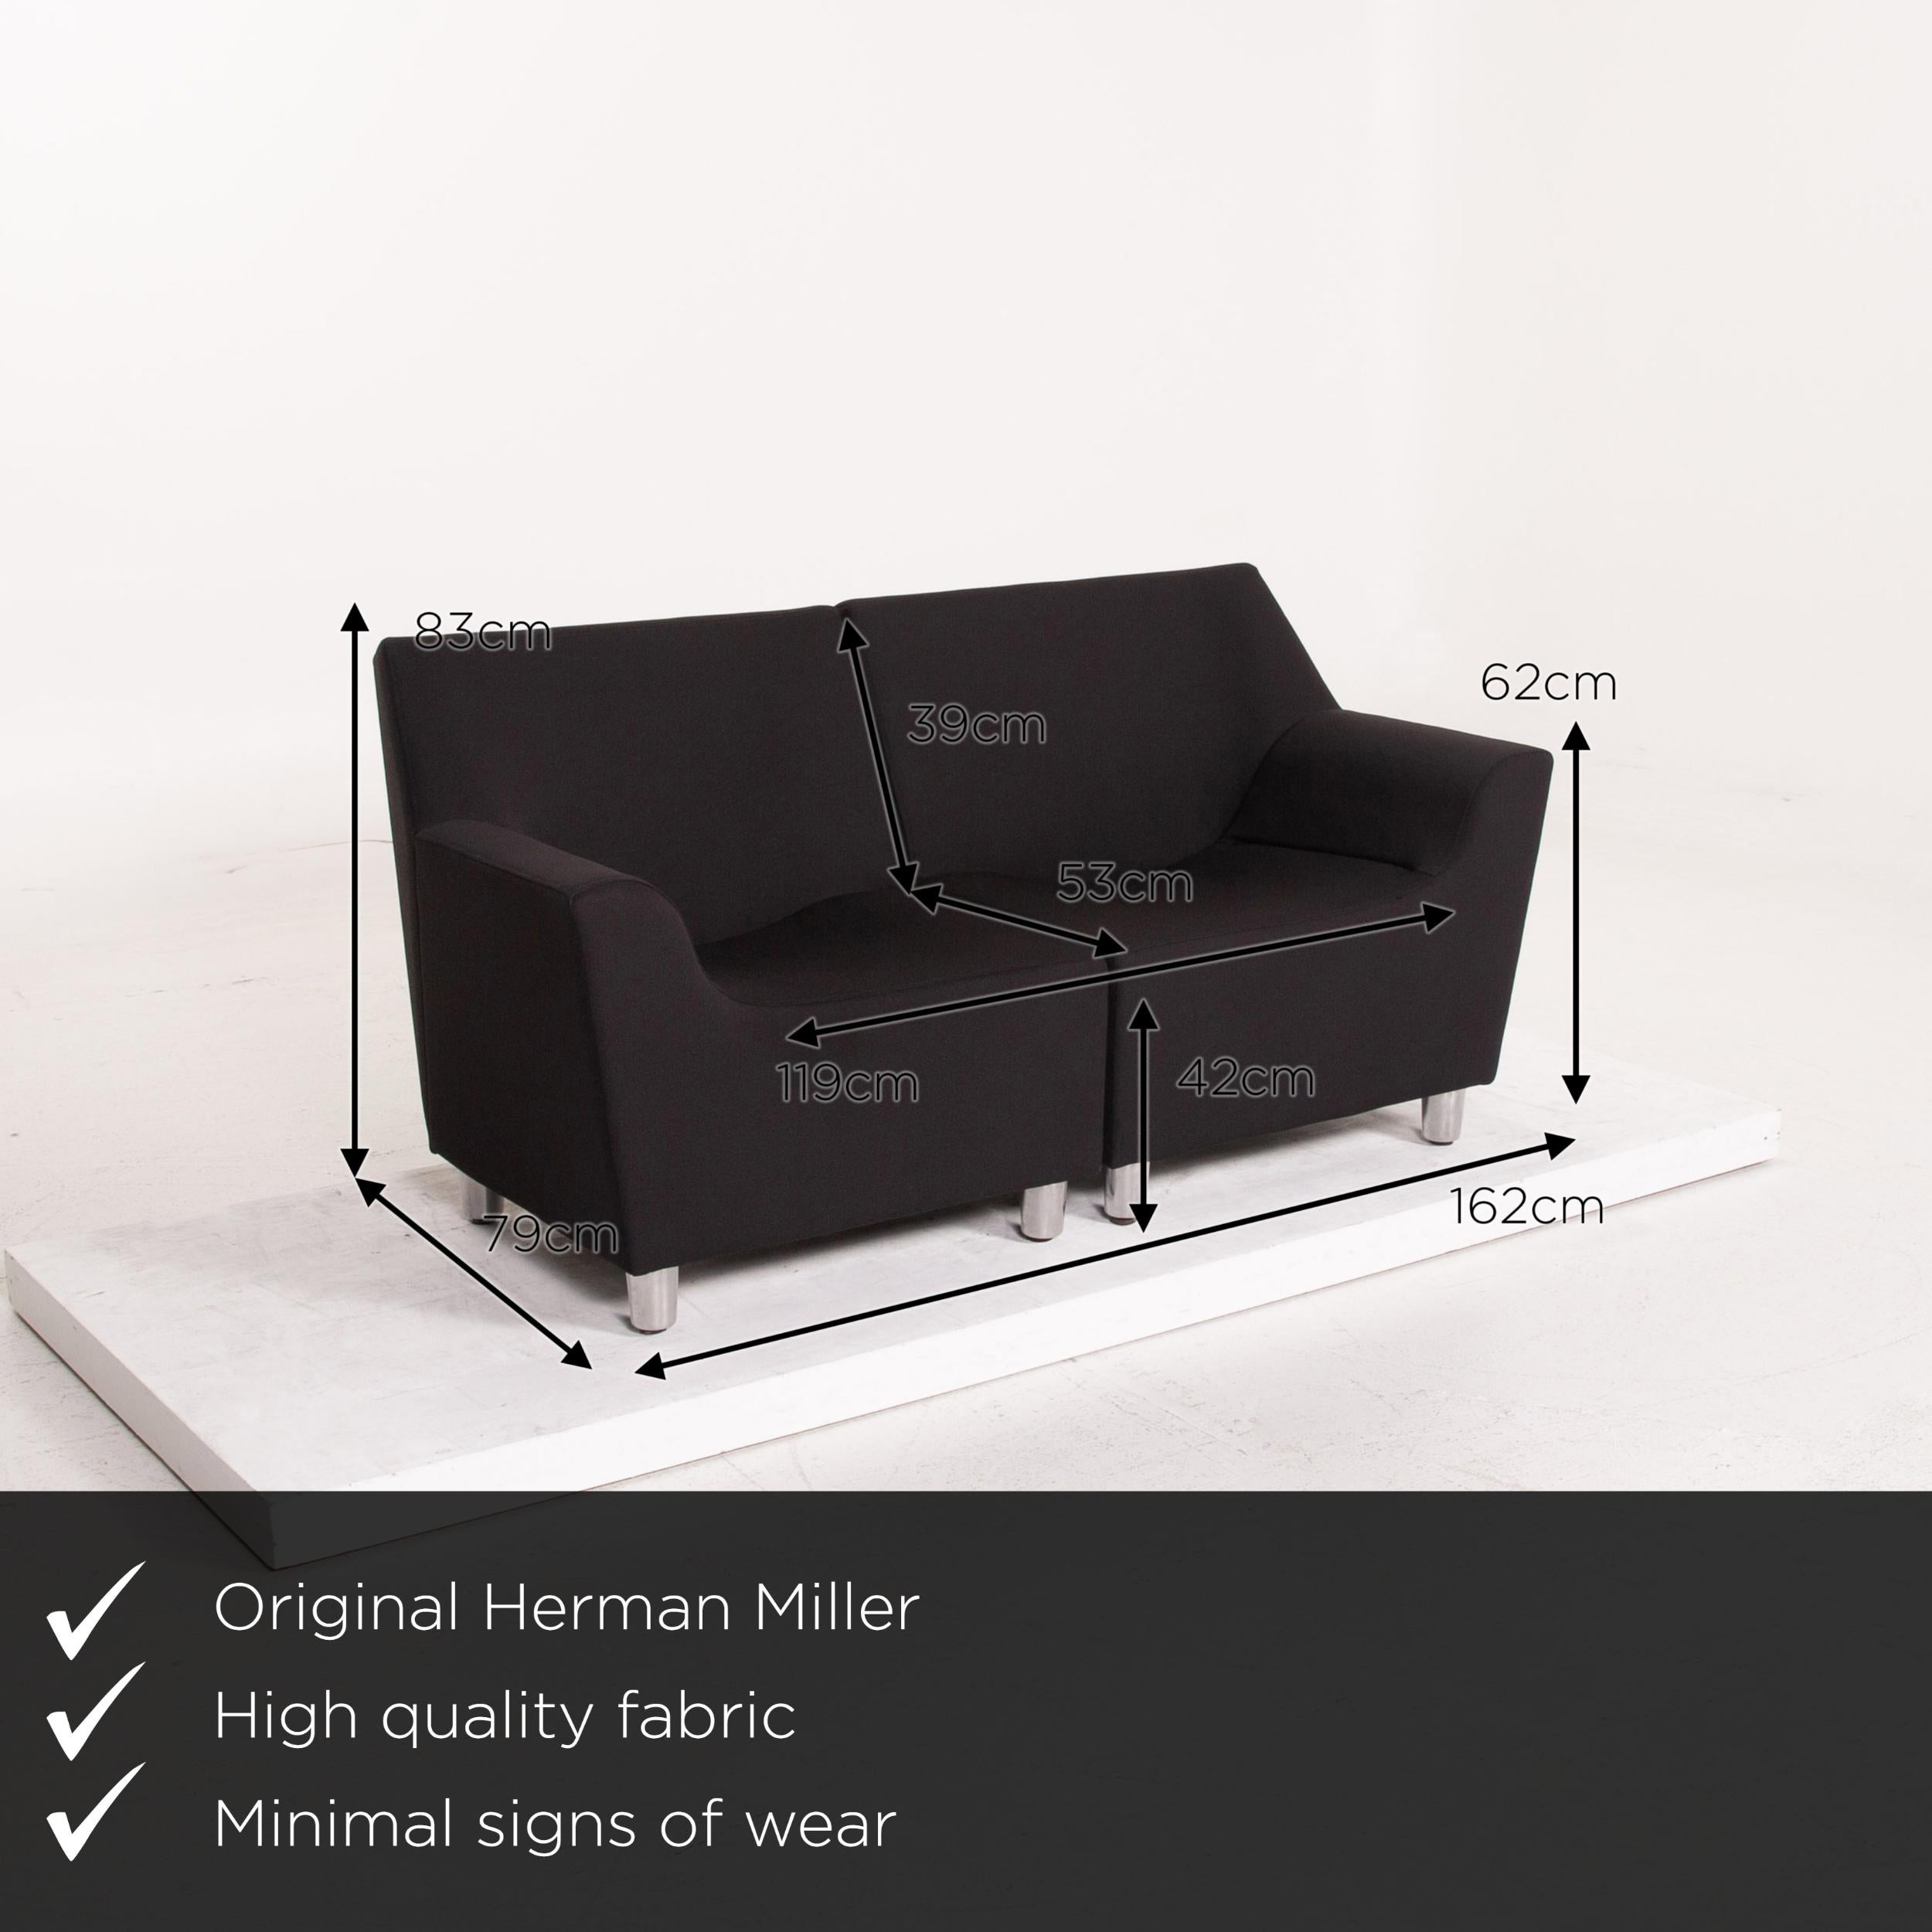 We present to you a Herman Miller loveseat fabric sofa black two-seat function modular couch.
  
 

 Product measurements in centimeters:
 

Depth 79
Width 162
Height 83
Seat height 42
Rest height 62
Seat depth 53
Seat width 119
Back